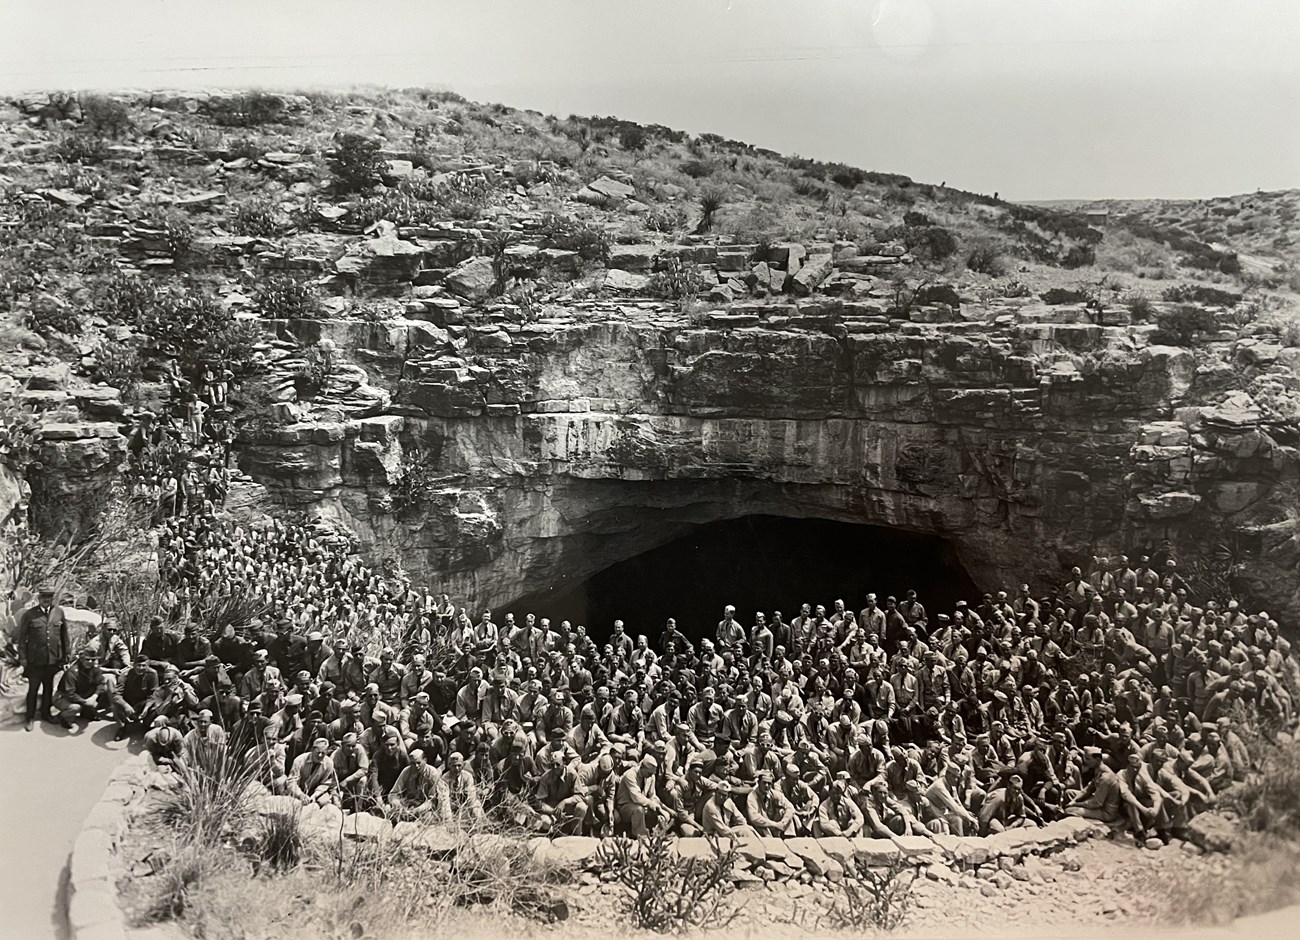 Dozens of soldiers pose for a picture in front of Carlsbad Caverns